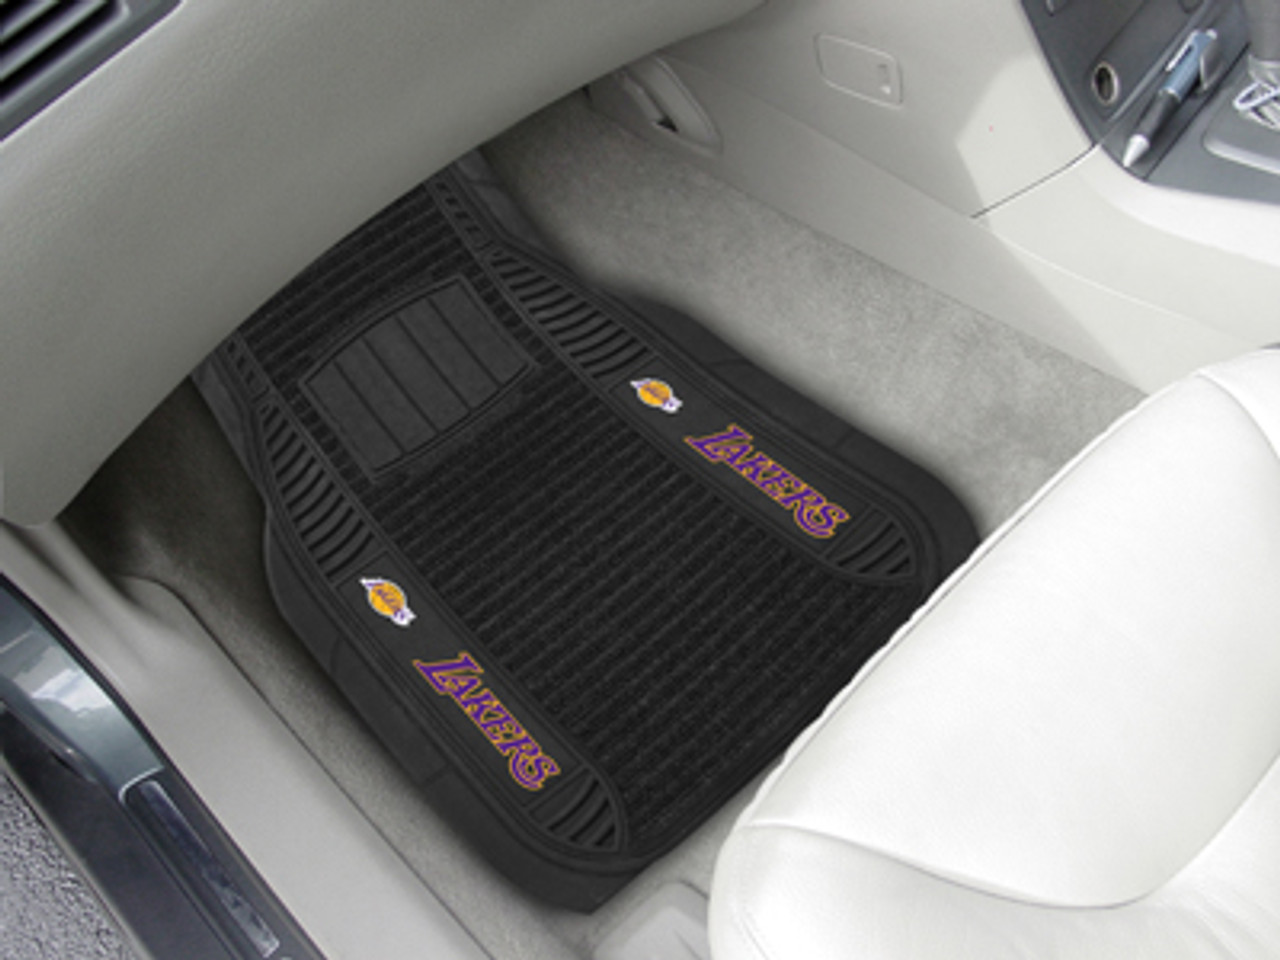 Fanmats Los Angeles Lakers Car Mats - Deluxe Set (Package of 2)